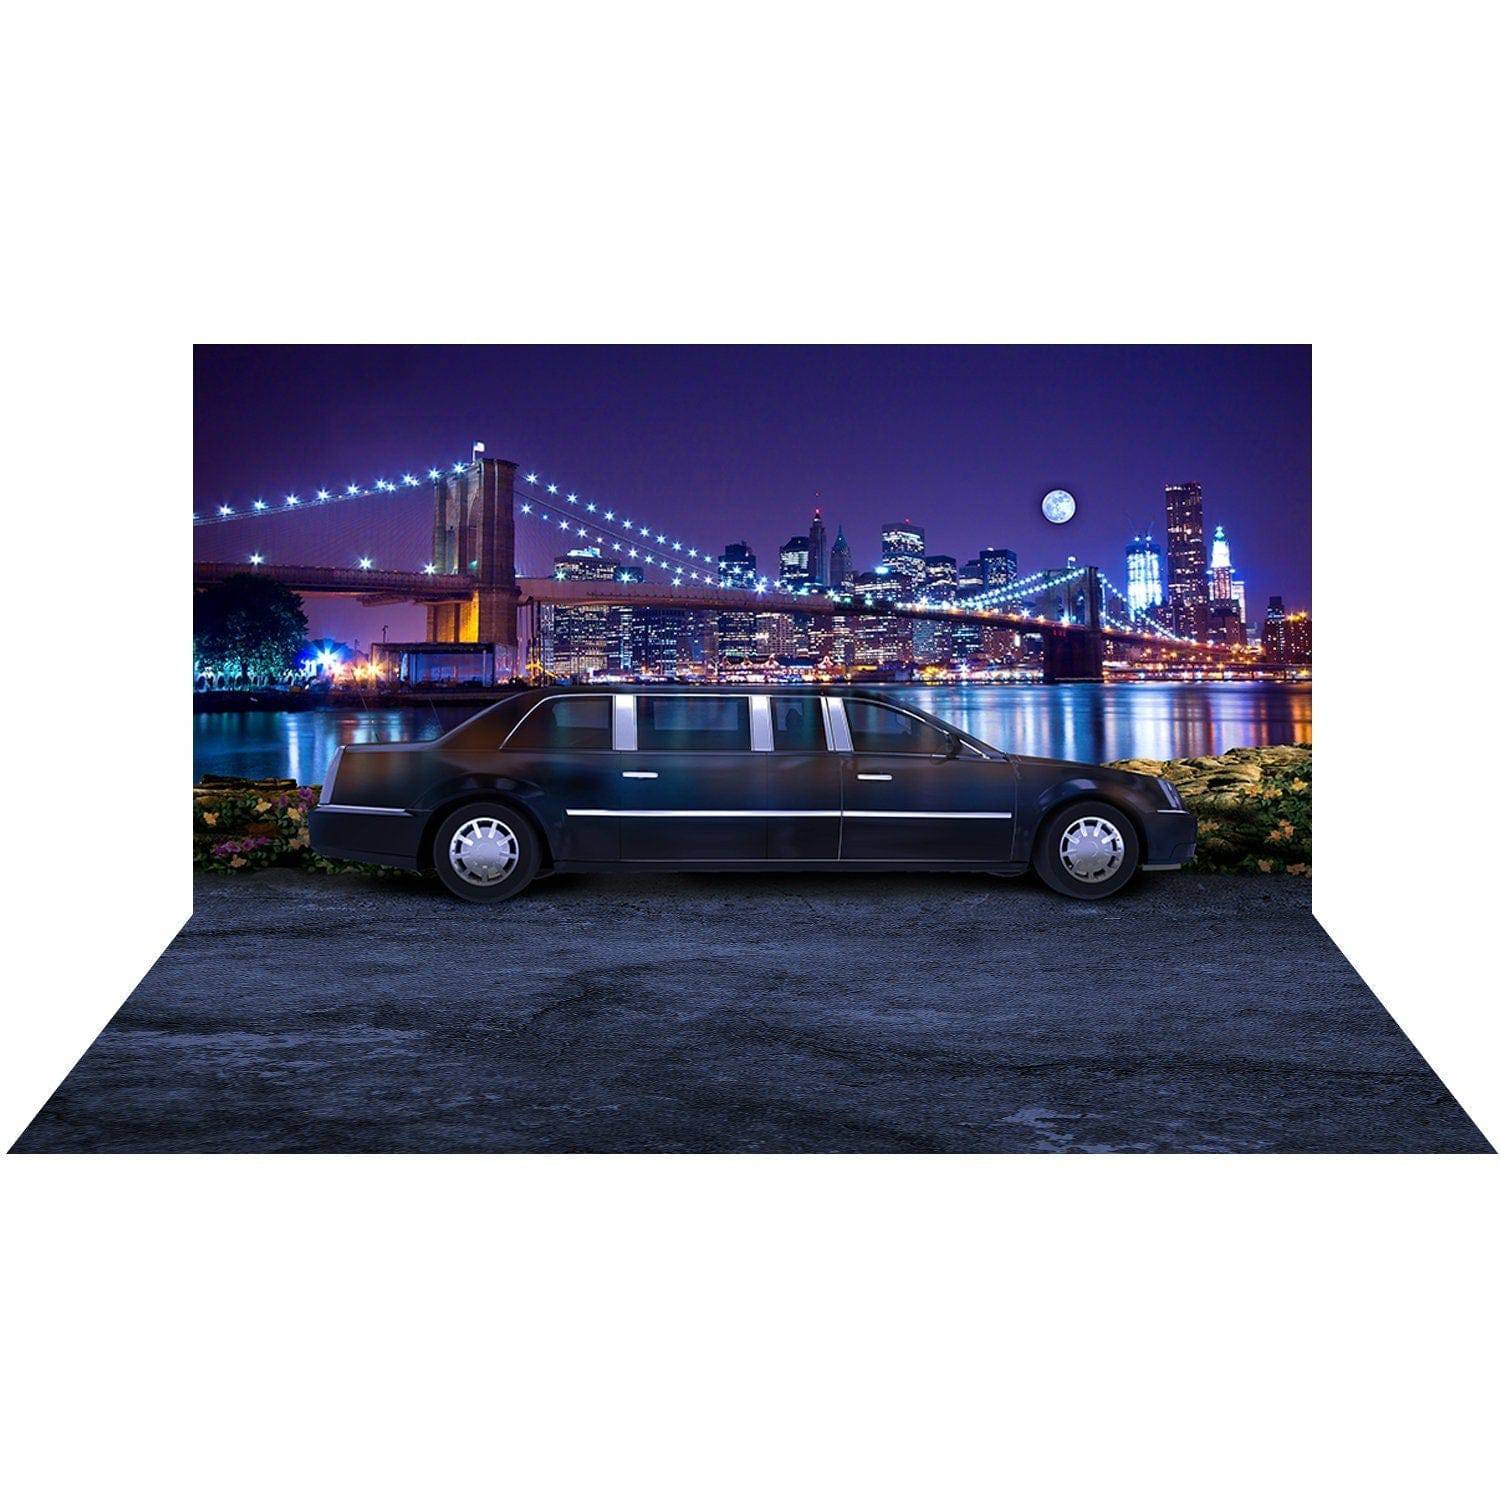 New York Limousine Party Photography Background